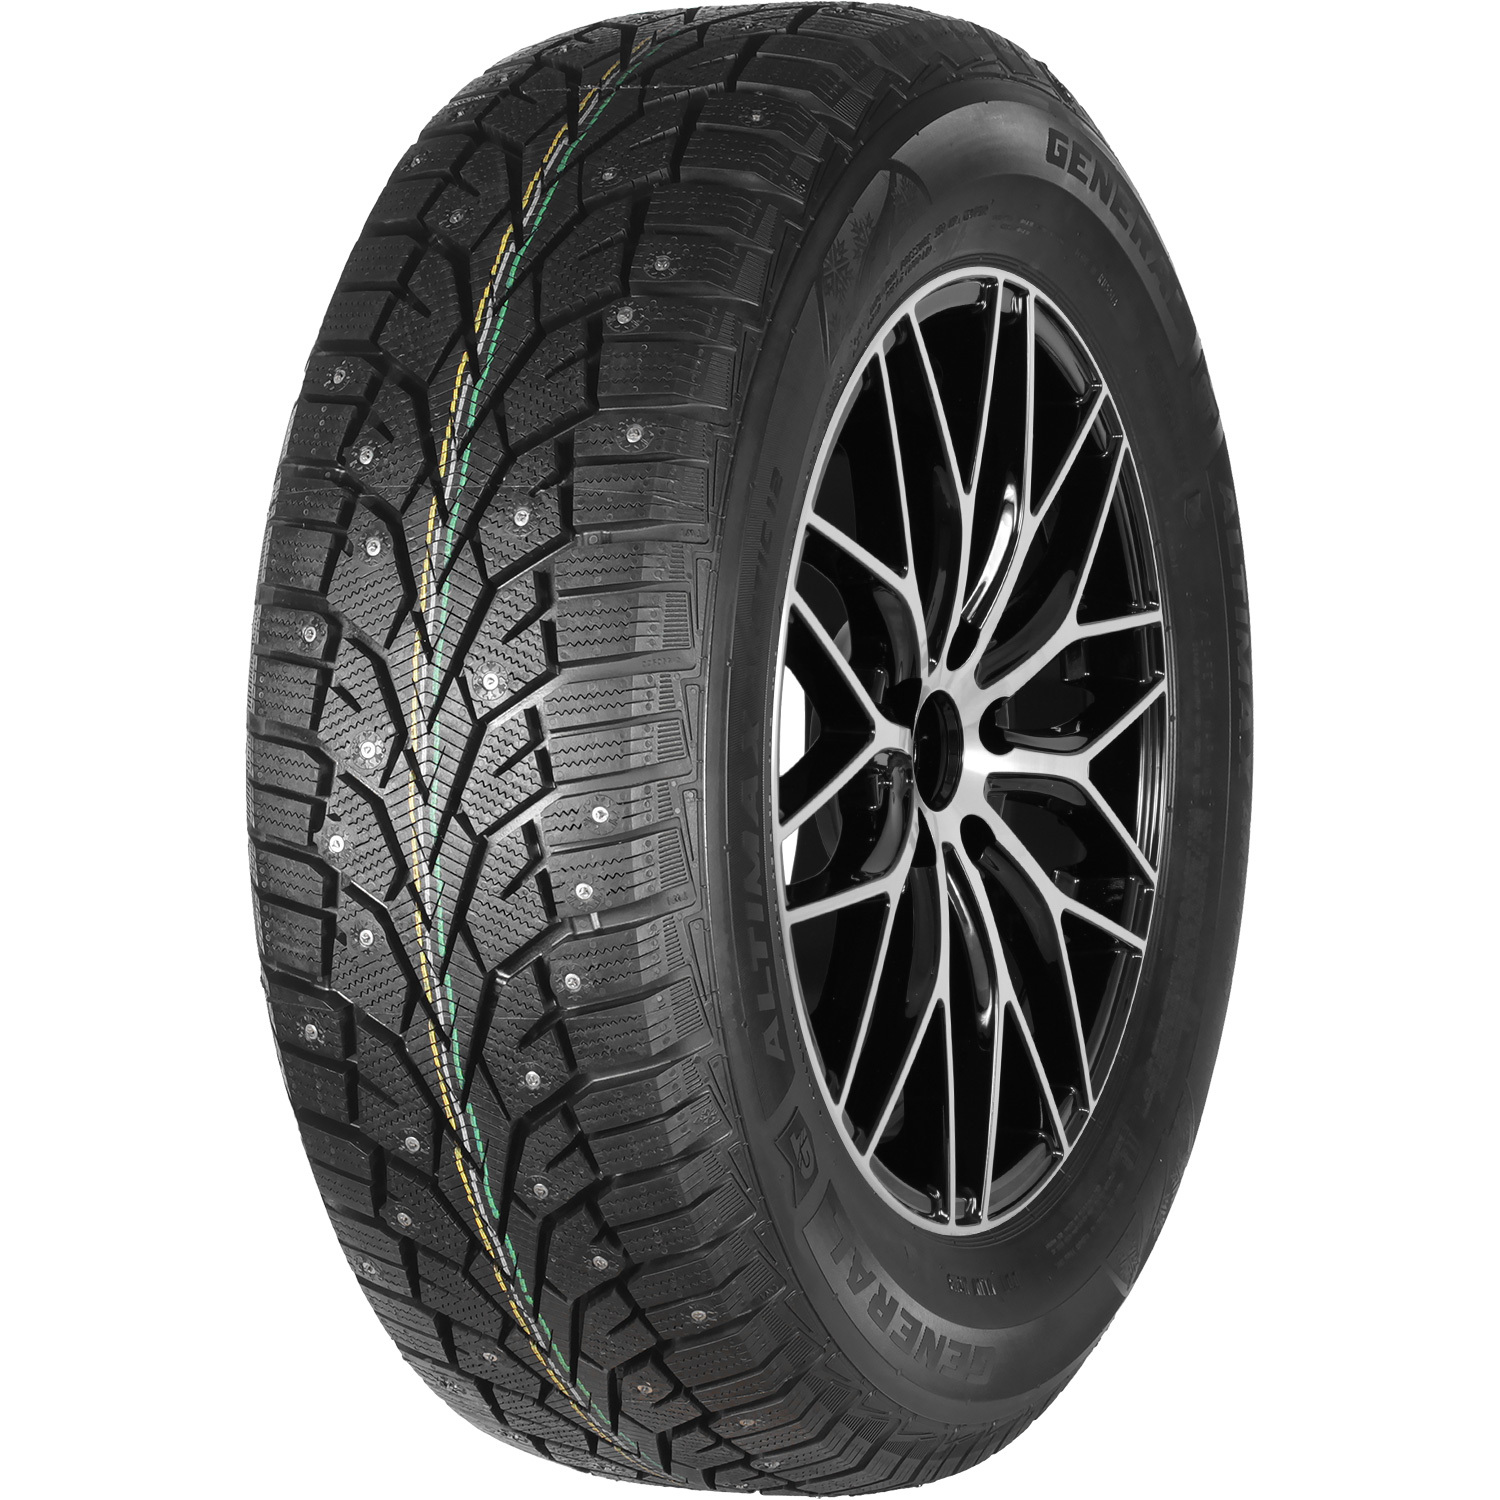 Автомобильная шина General Tire Altimax Arctic 12 205/65 R15 99T Шипованные fall for jesus he never leaves tire cover spare tire cover car accessories custom spare tire covers your own tire protectors